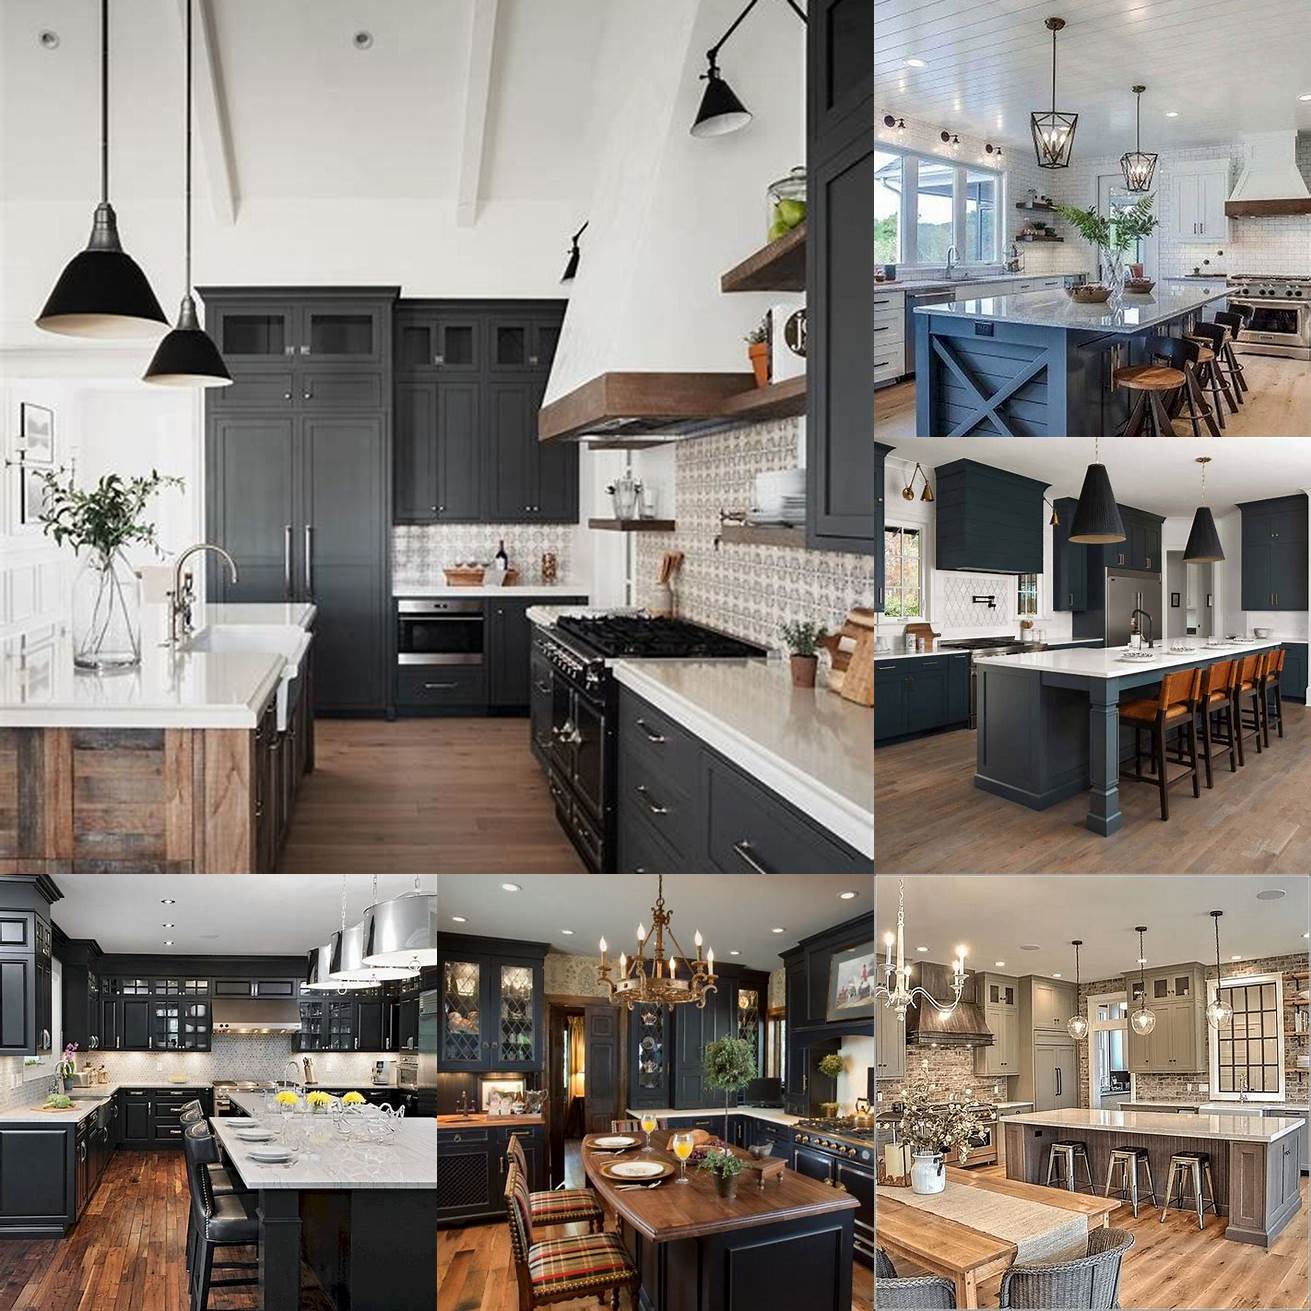 5 Modern Farmhouse - A sleek and stylish kitchen with black cabinets marble countertops and industrial-style lighting The wooden accents and farmhouse sink add a touch of rustic charm